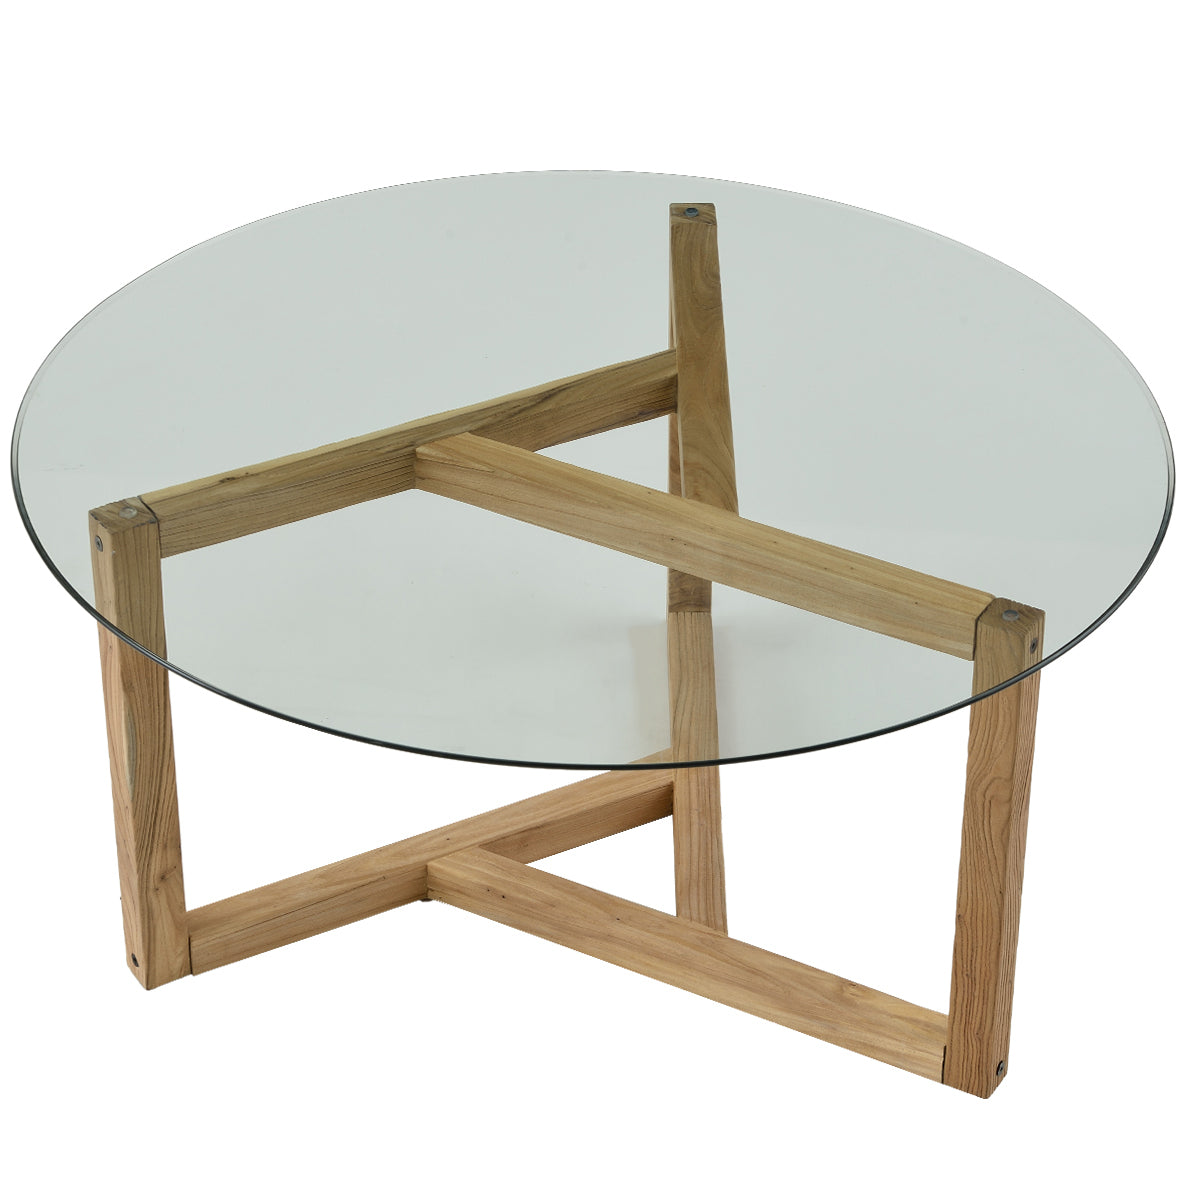 ON-TREND Round Glass Coffee Table (Natural)